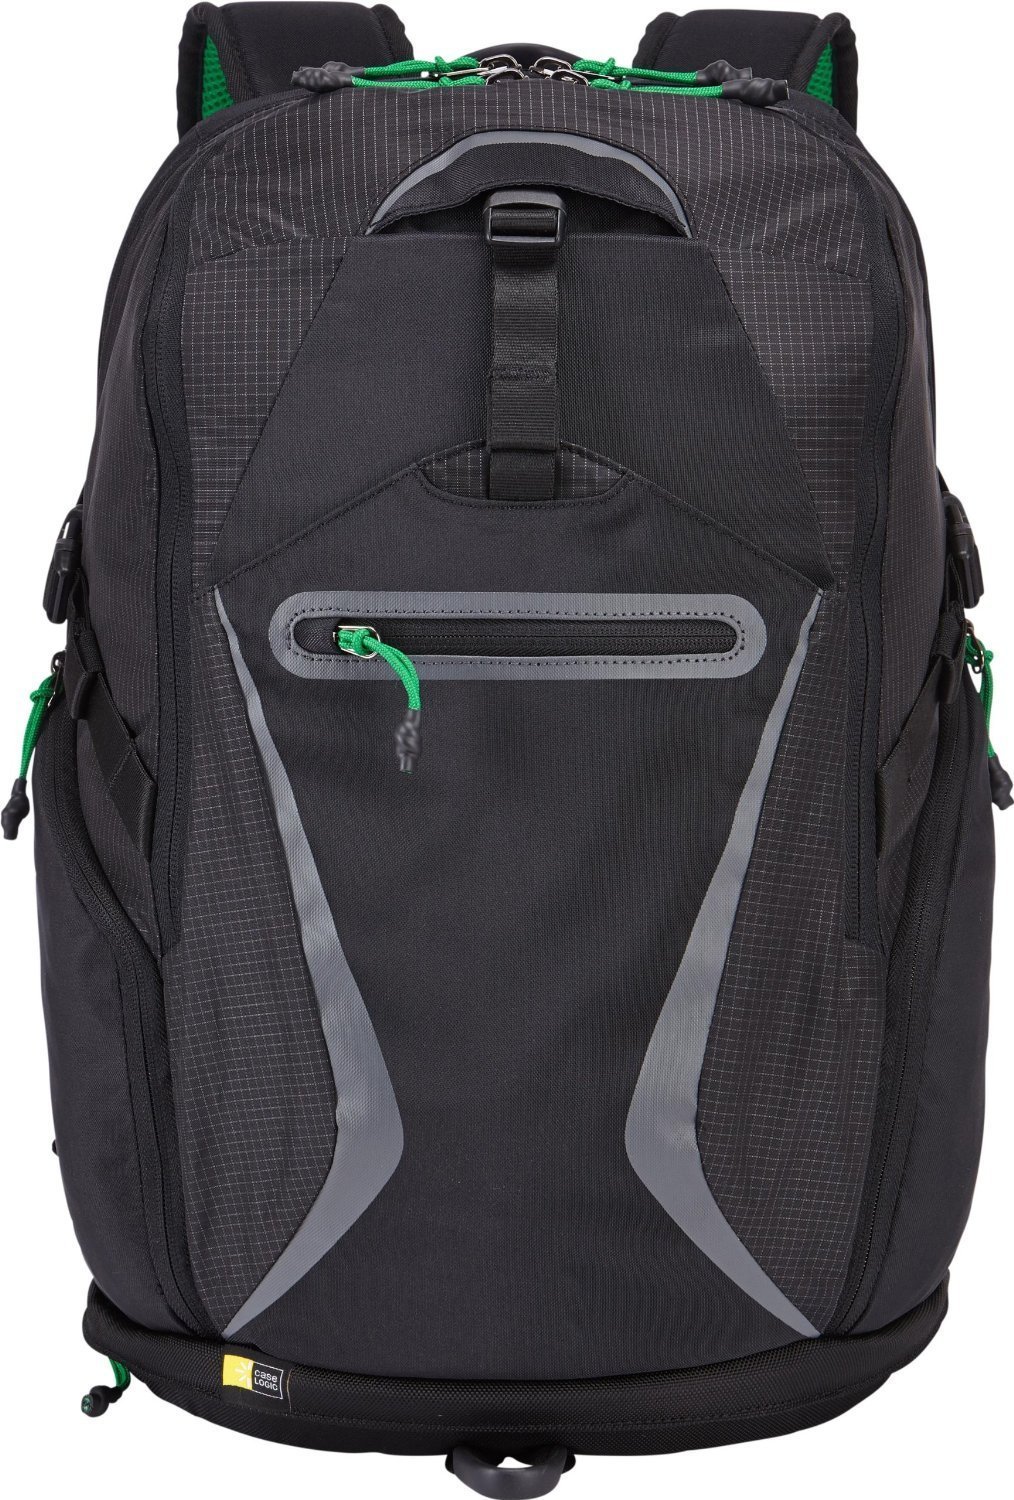 BOGB-115 Griffith Park Laptop and Tablet Backpack, Choose Your Color - image 1 of 5